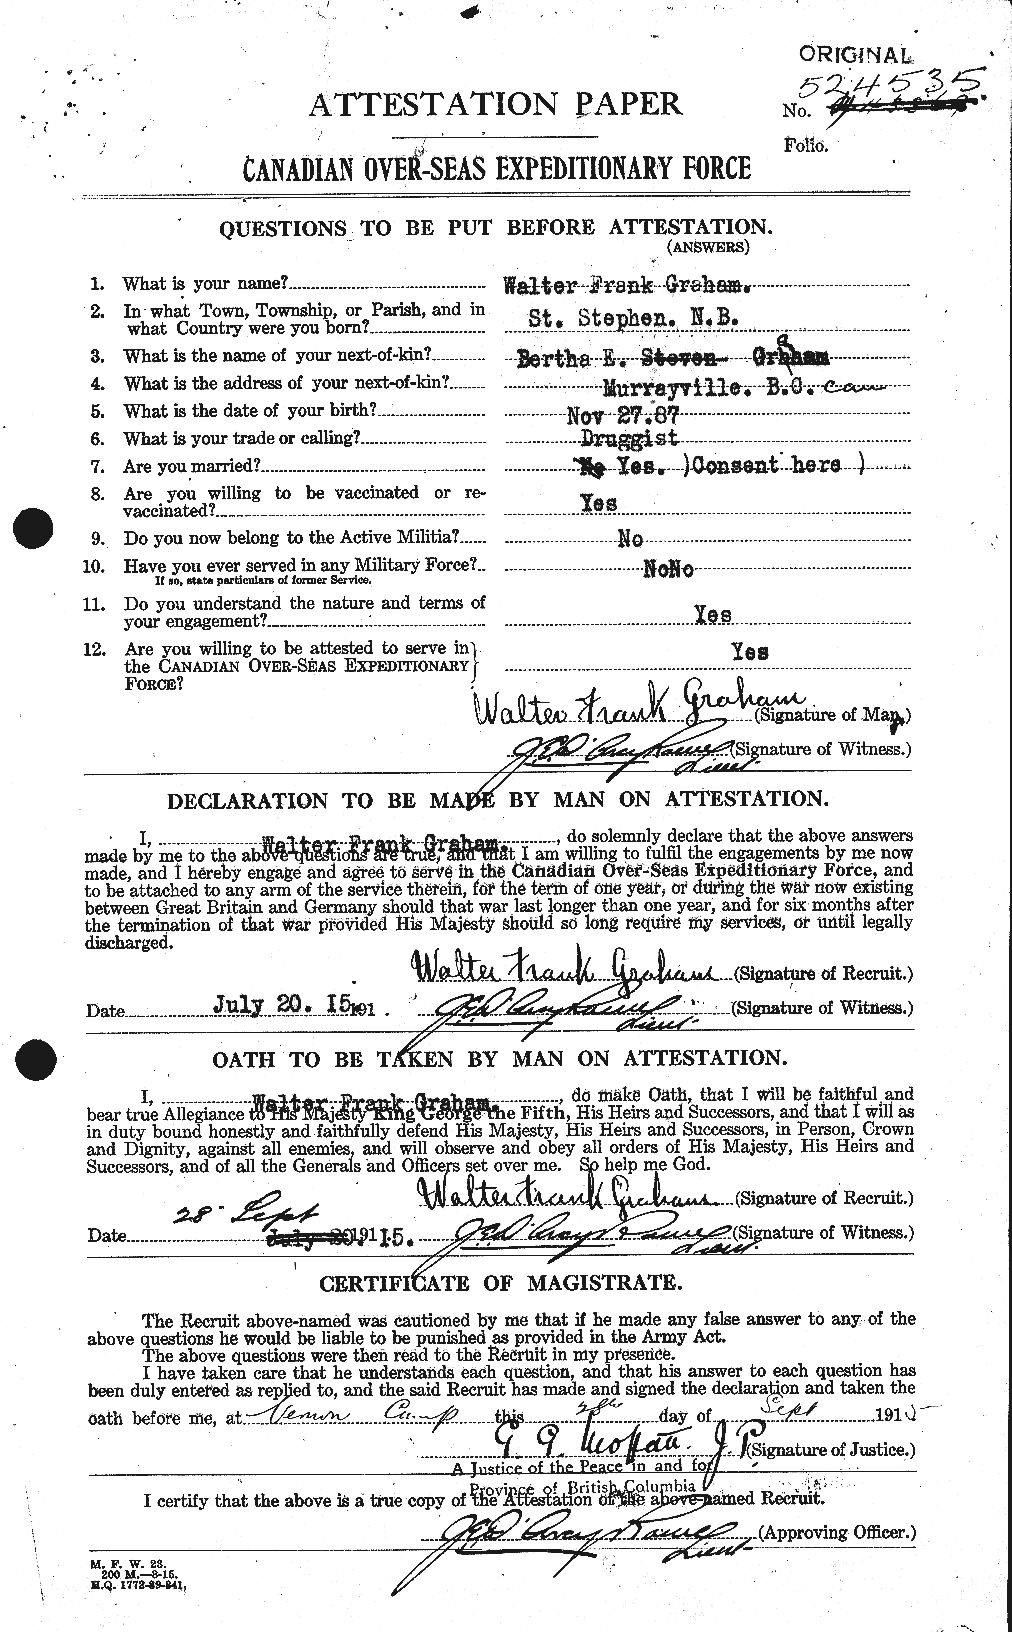 Personnel Records of the First World War - CEF 362658a